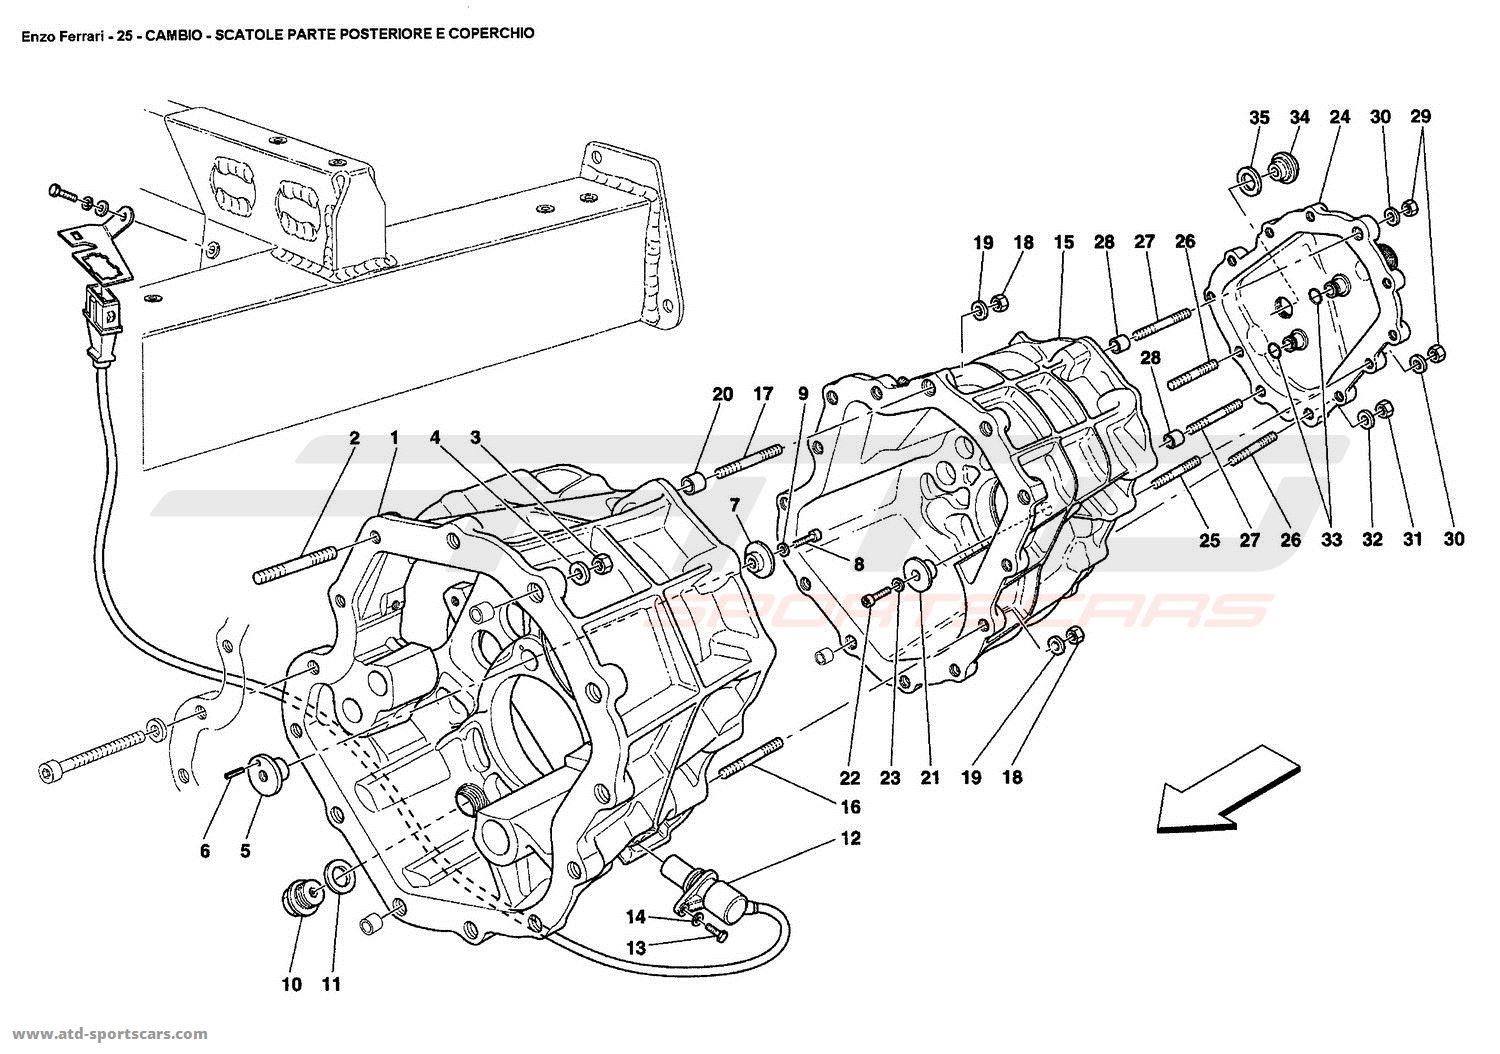 GEARBOX - REAR PART GEARBOXES HOUSING AND COVER